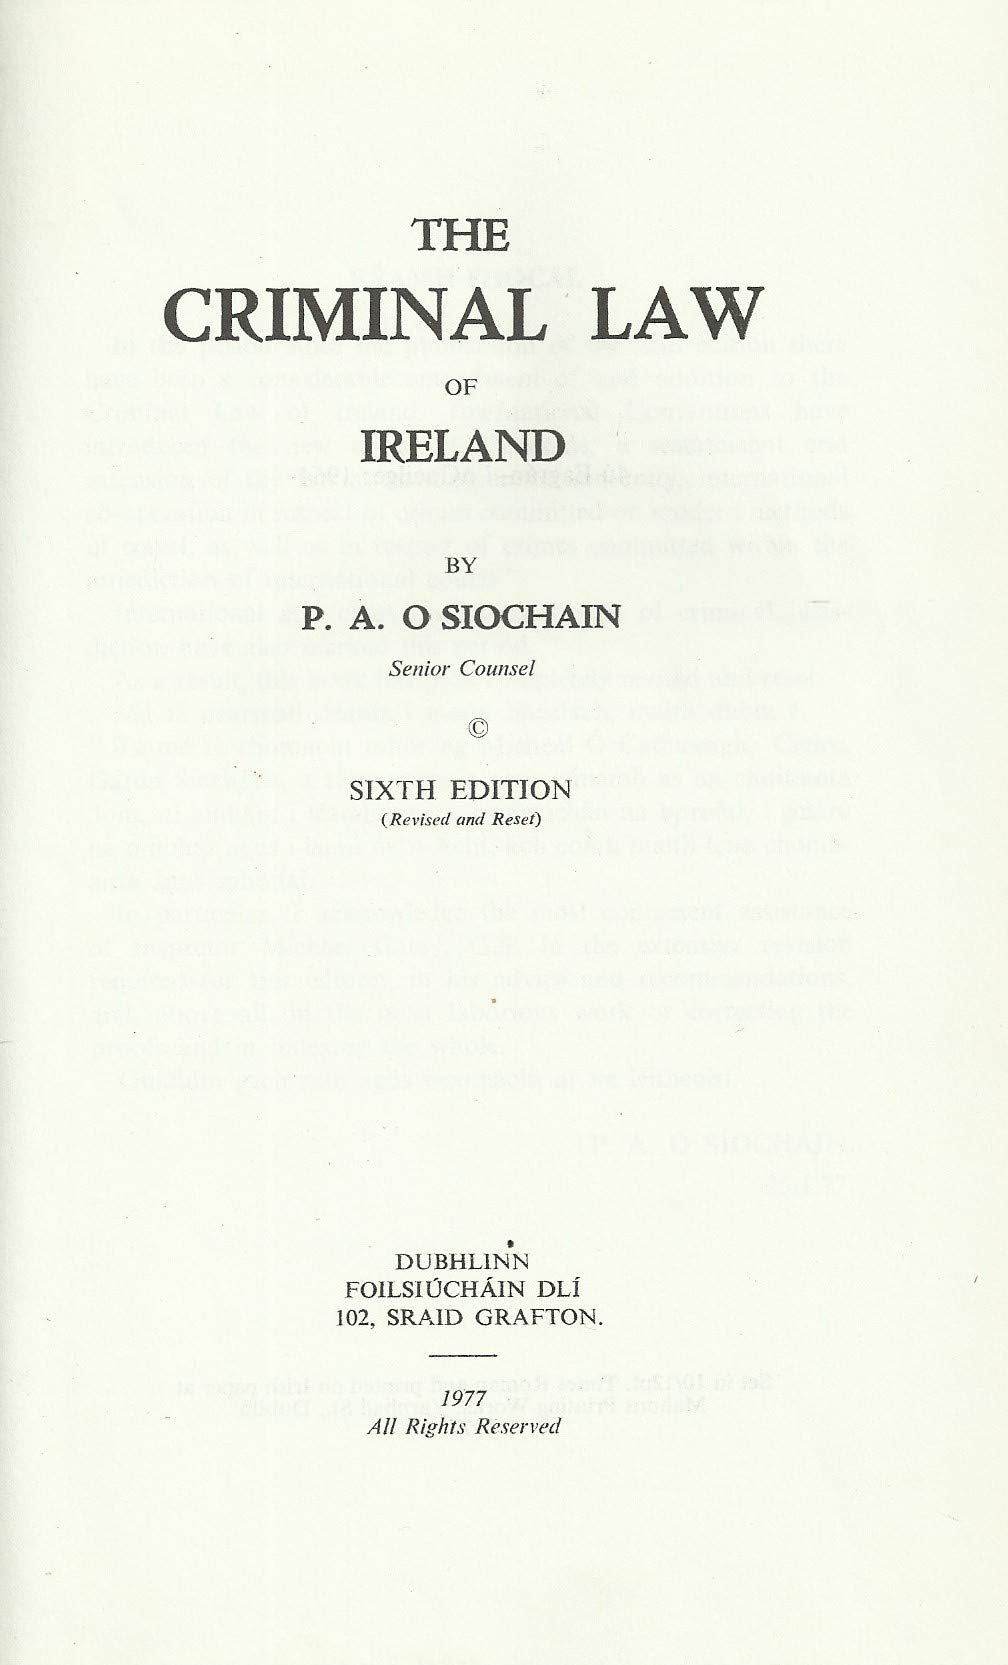 The Criminal Law of Ireland - Sixth Edition (6th Edition Revised and Reset)